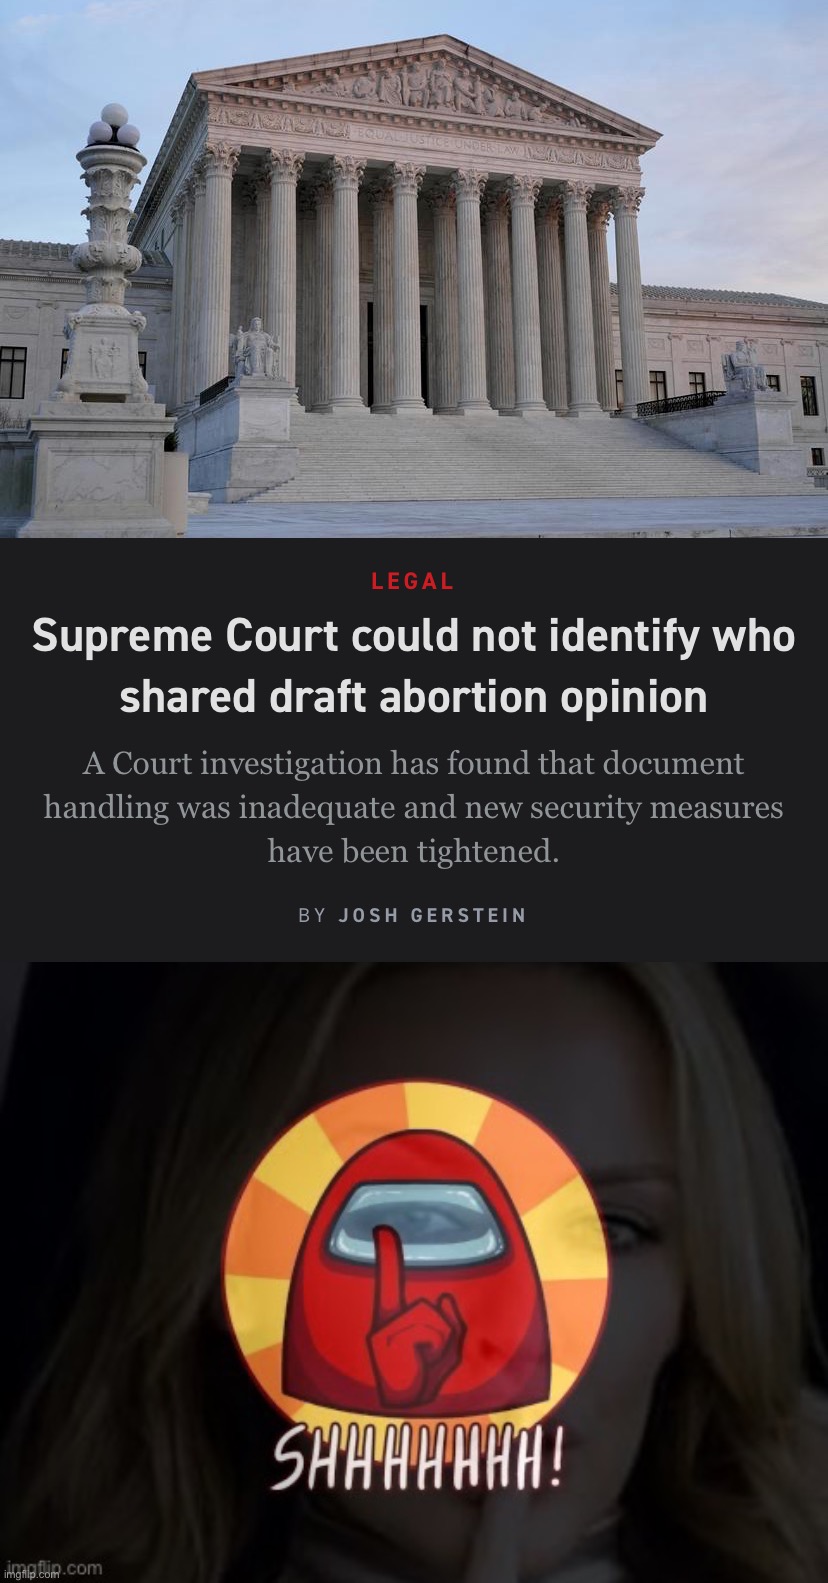 Sad! | image tagged in supreme court could not identify leaker,kylie imposter shhh | made w/ Imgflip meme maker